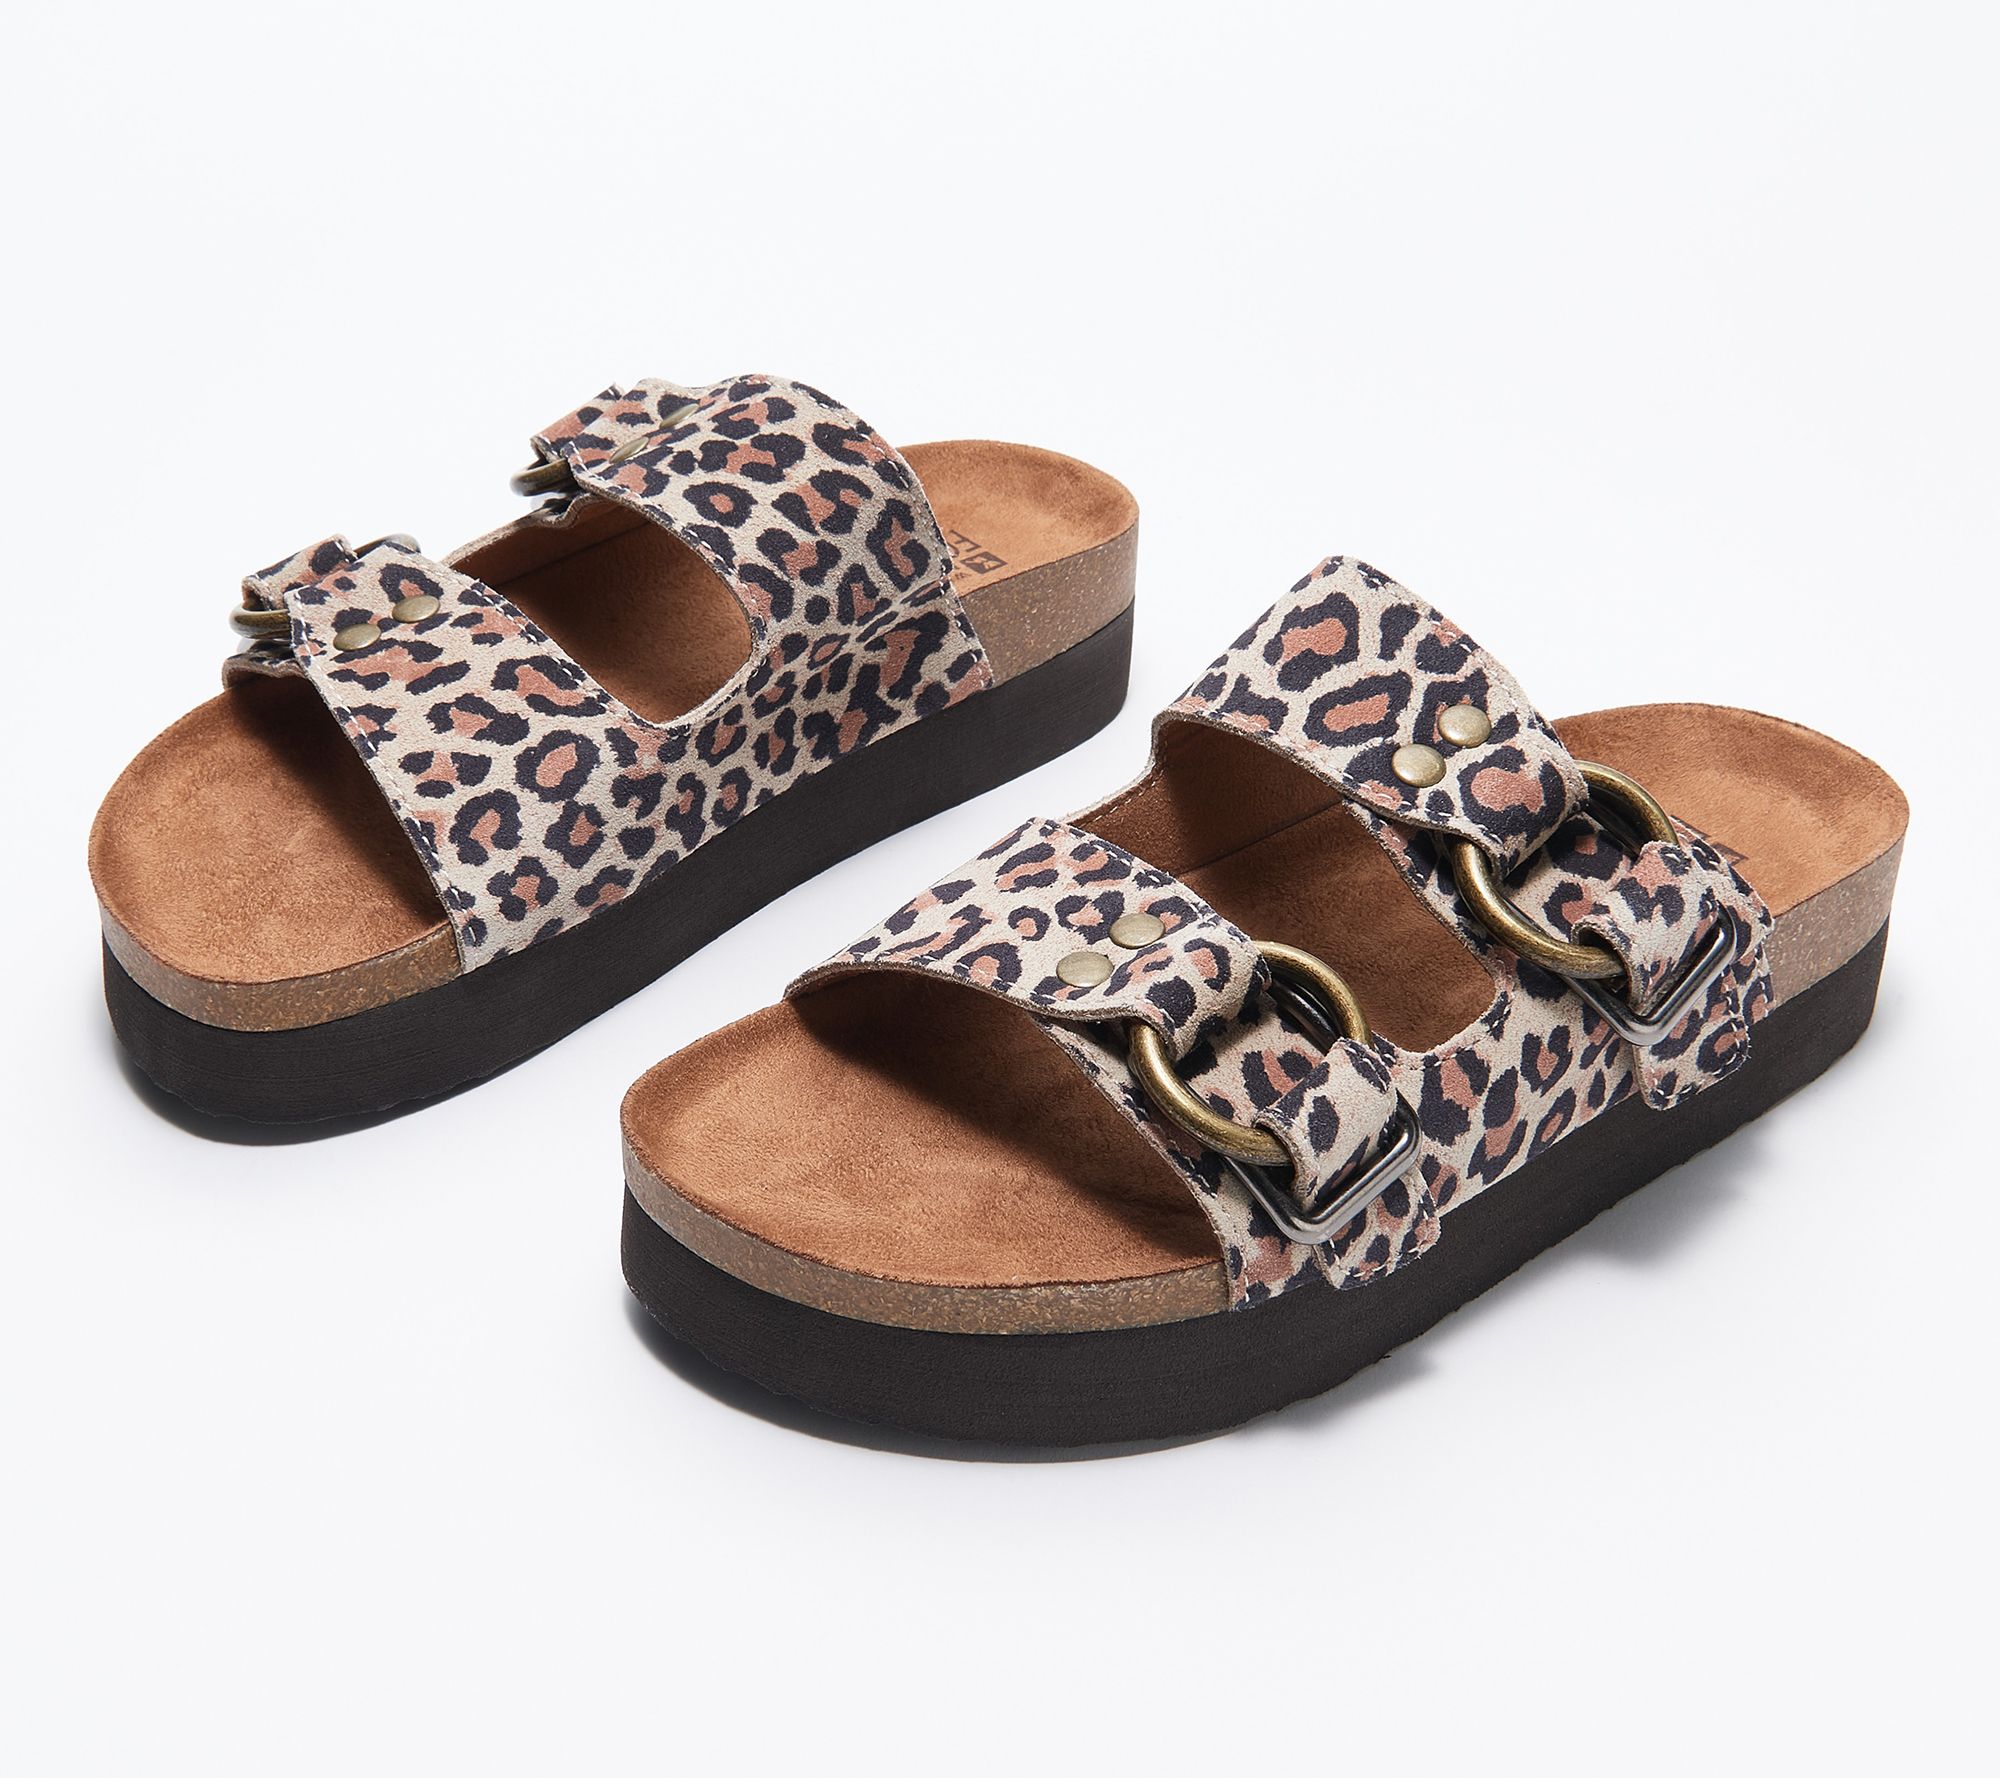 White Mountain Leather or Print Slide Sandals - Honesty - QVC.com